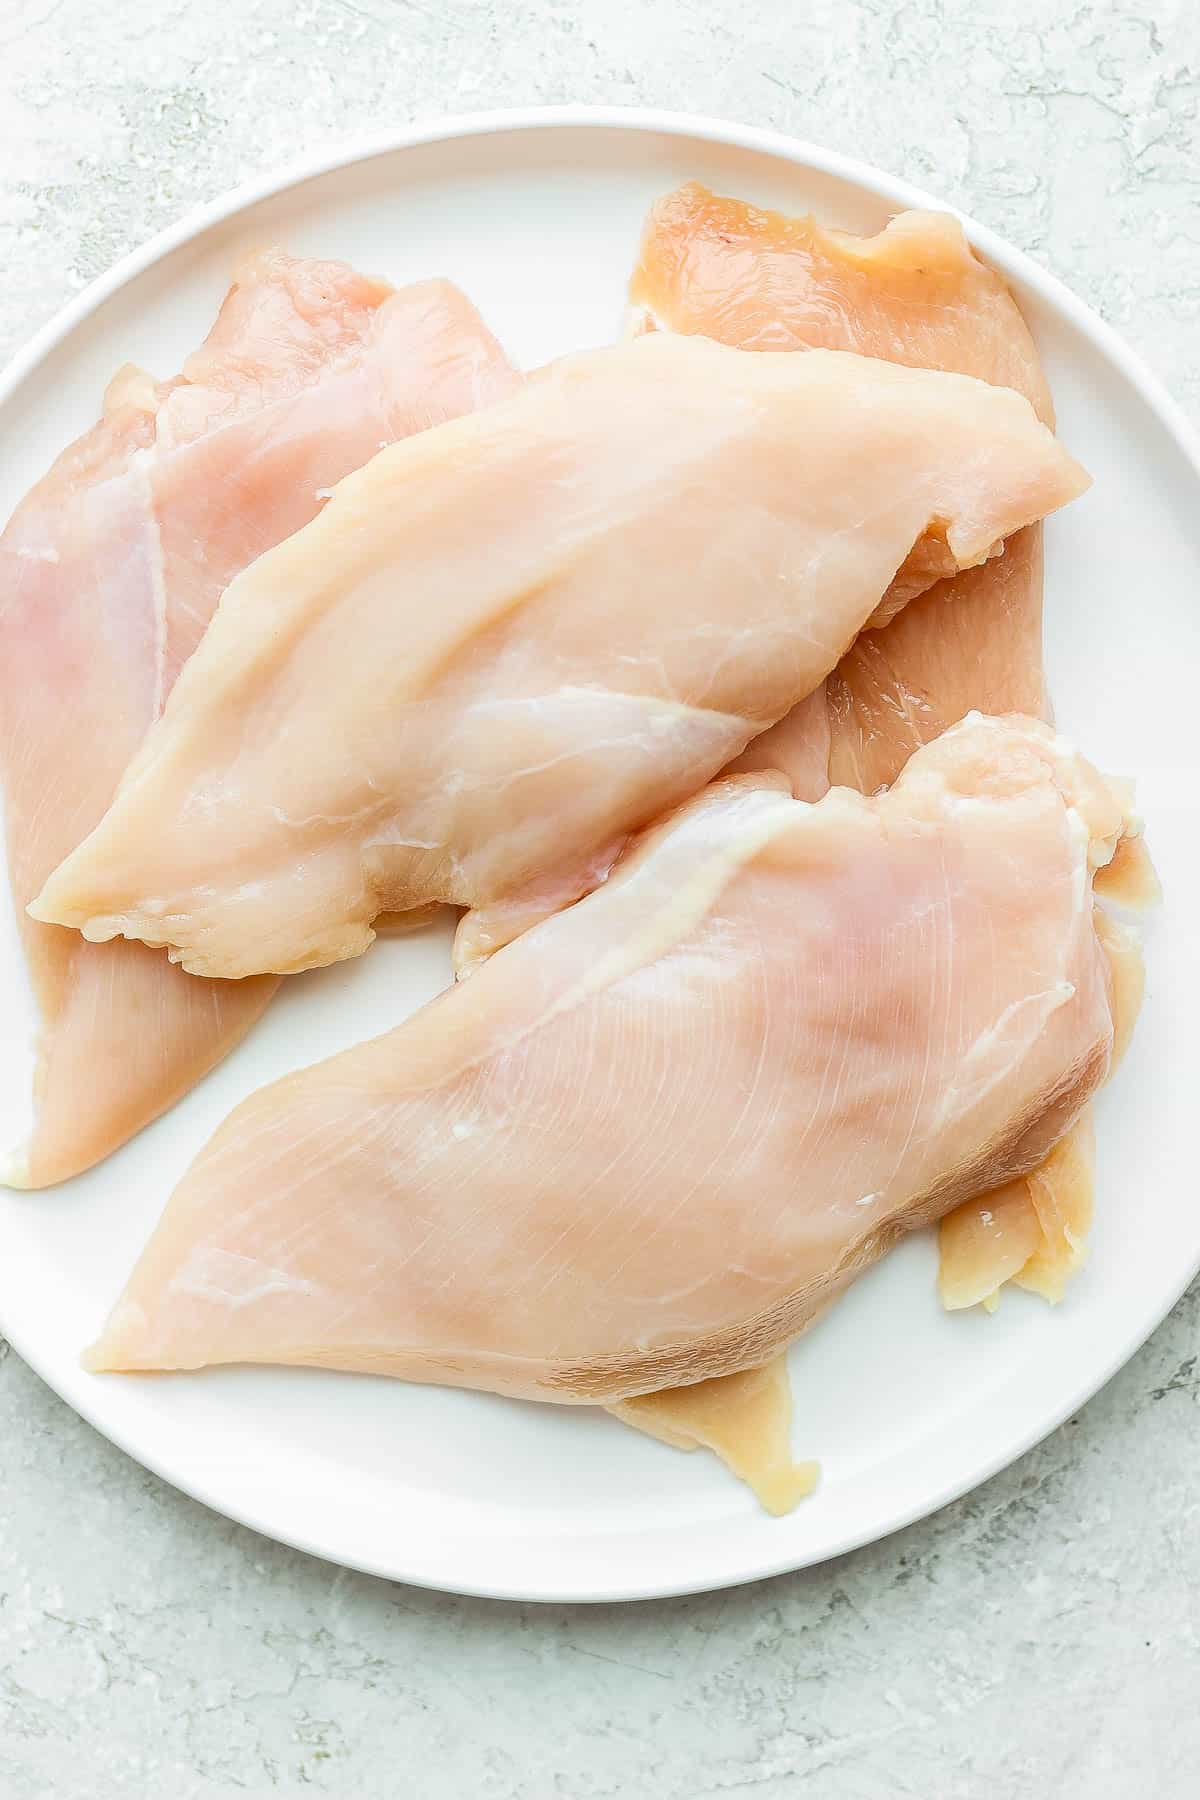 Raw chicken cutlets on a white plate.